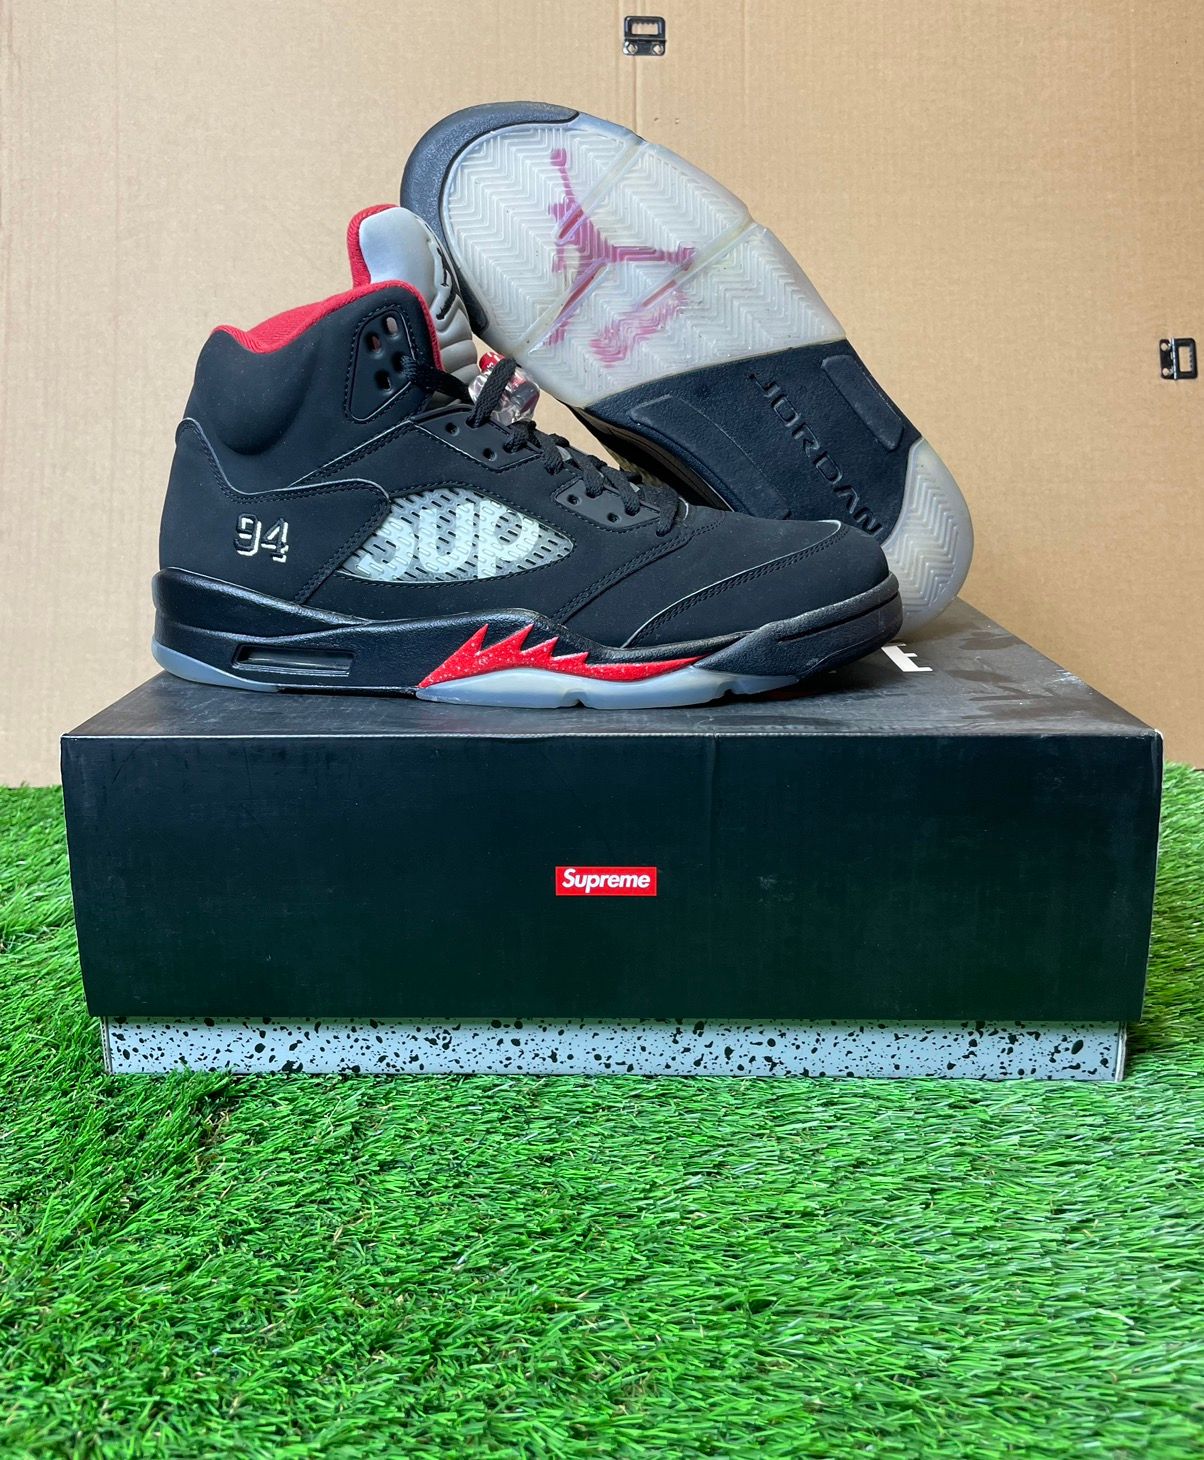 Pre-owned Jordan Brand 5 Supreme Size 12 Used Shoes In Black